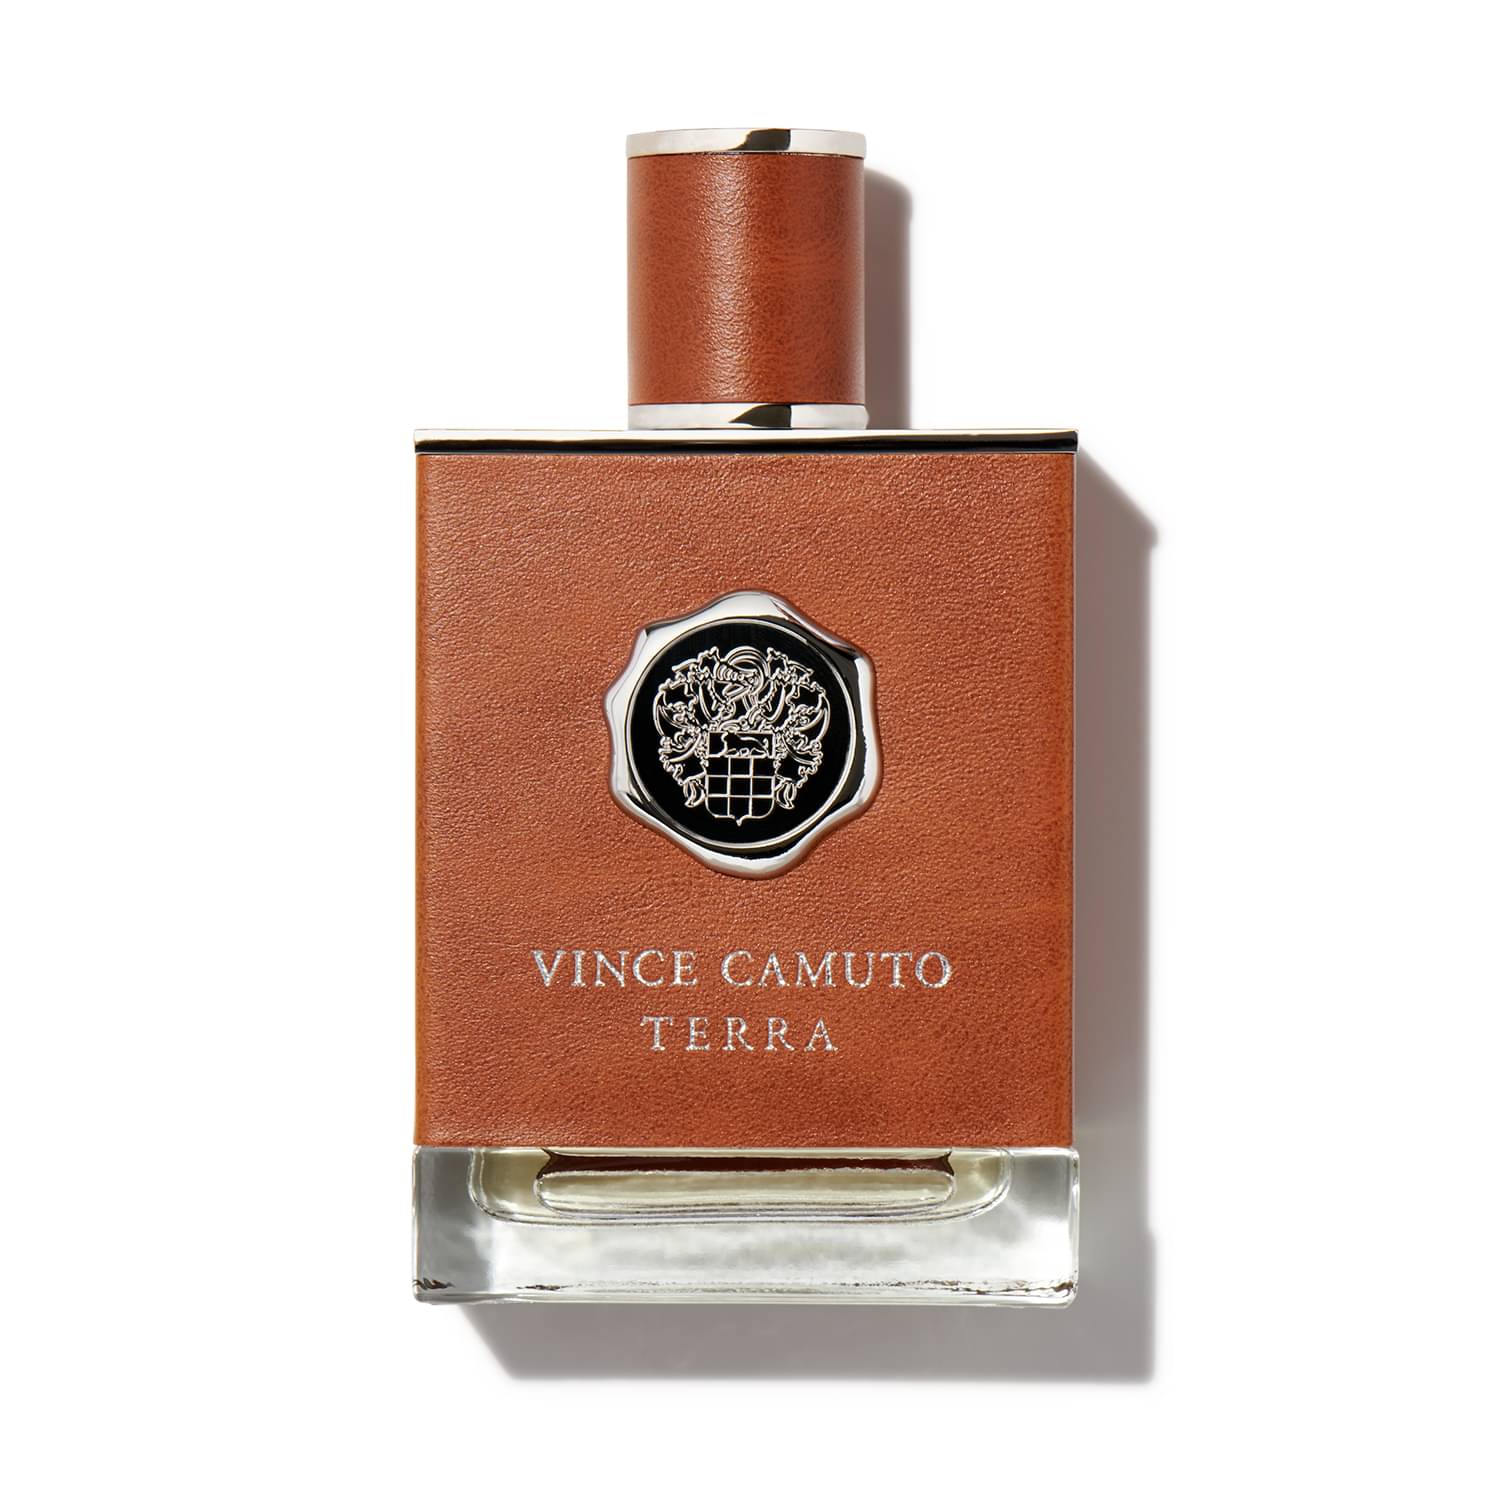 FOR HIM: Vince Camuto Homme - The Perfume Society